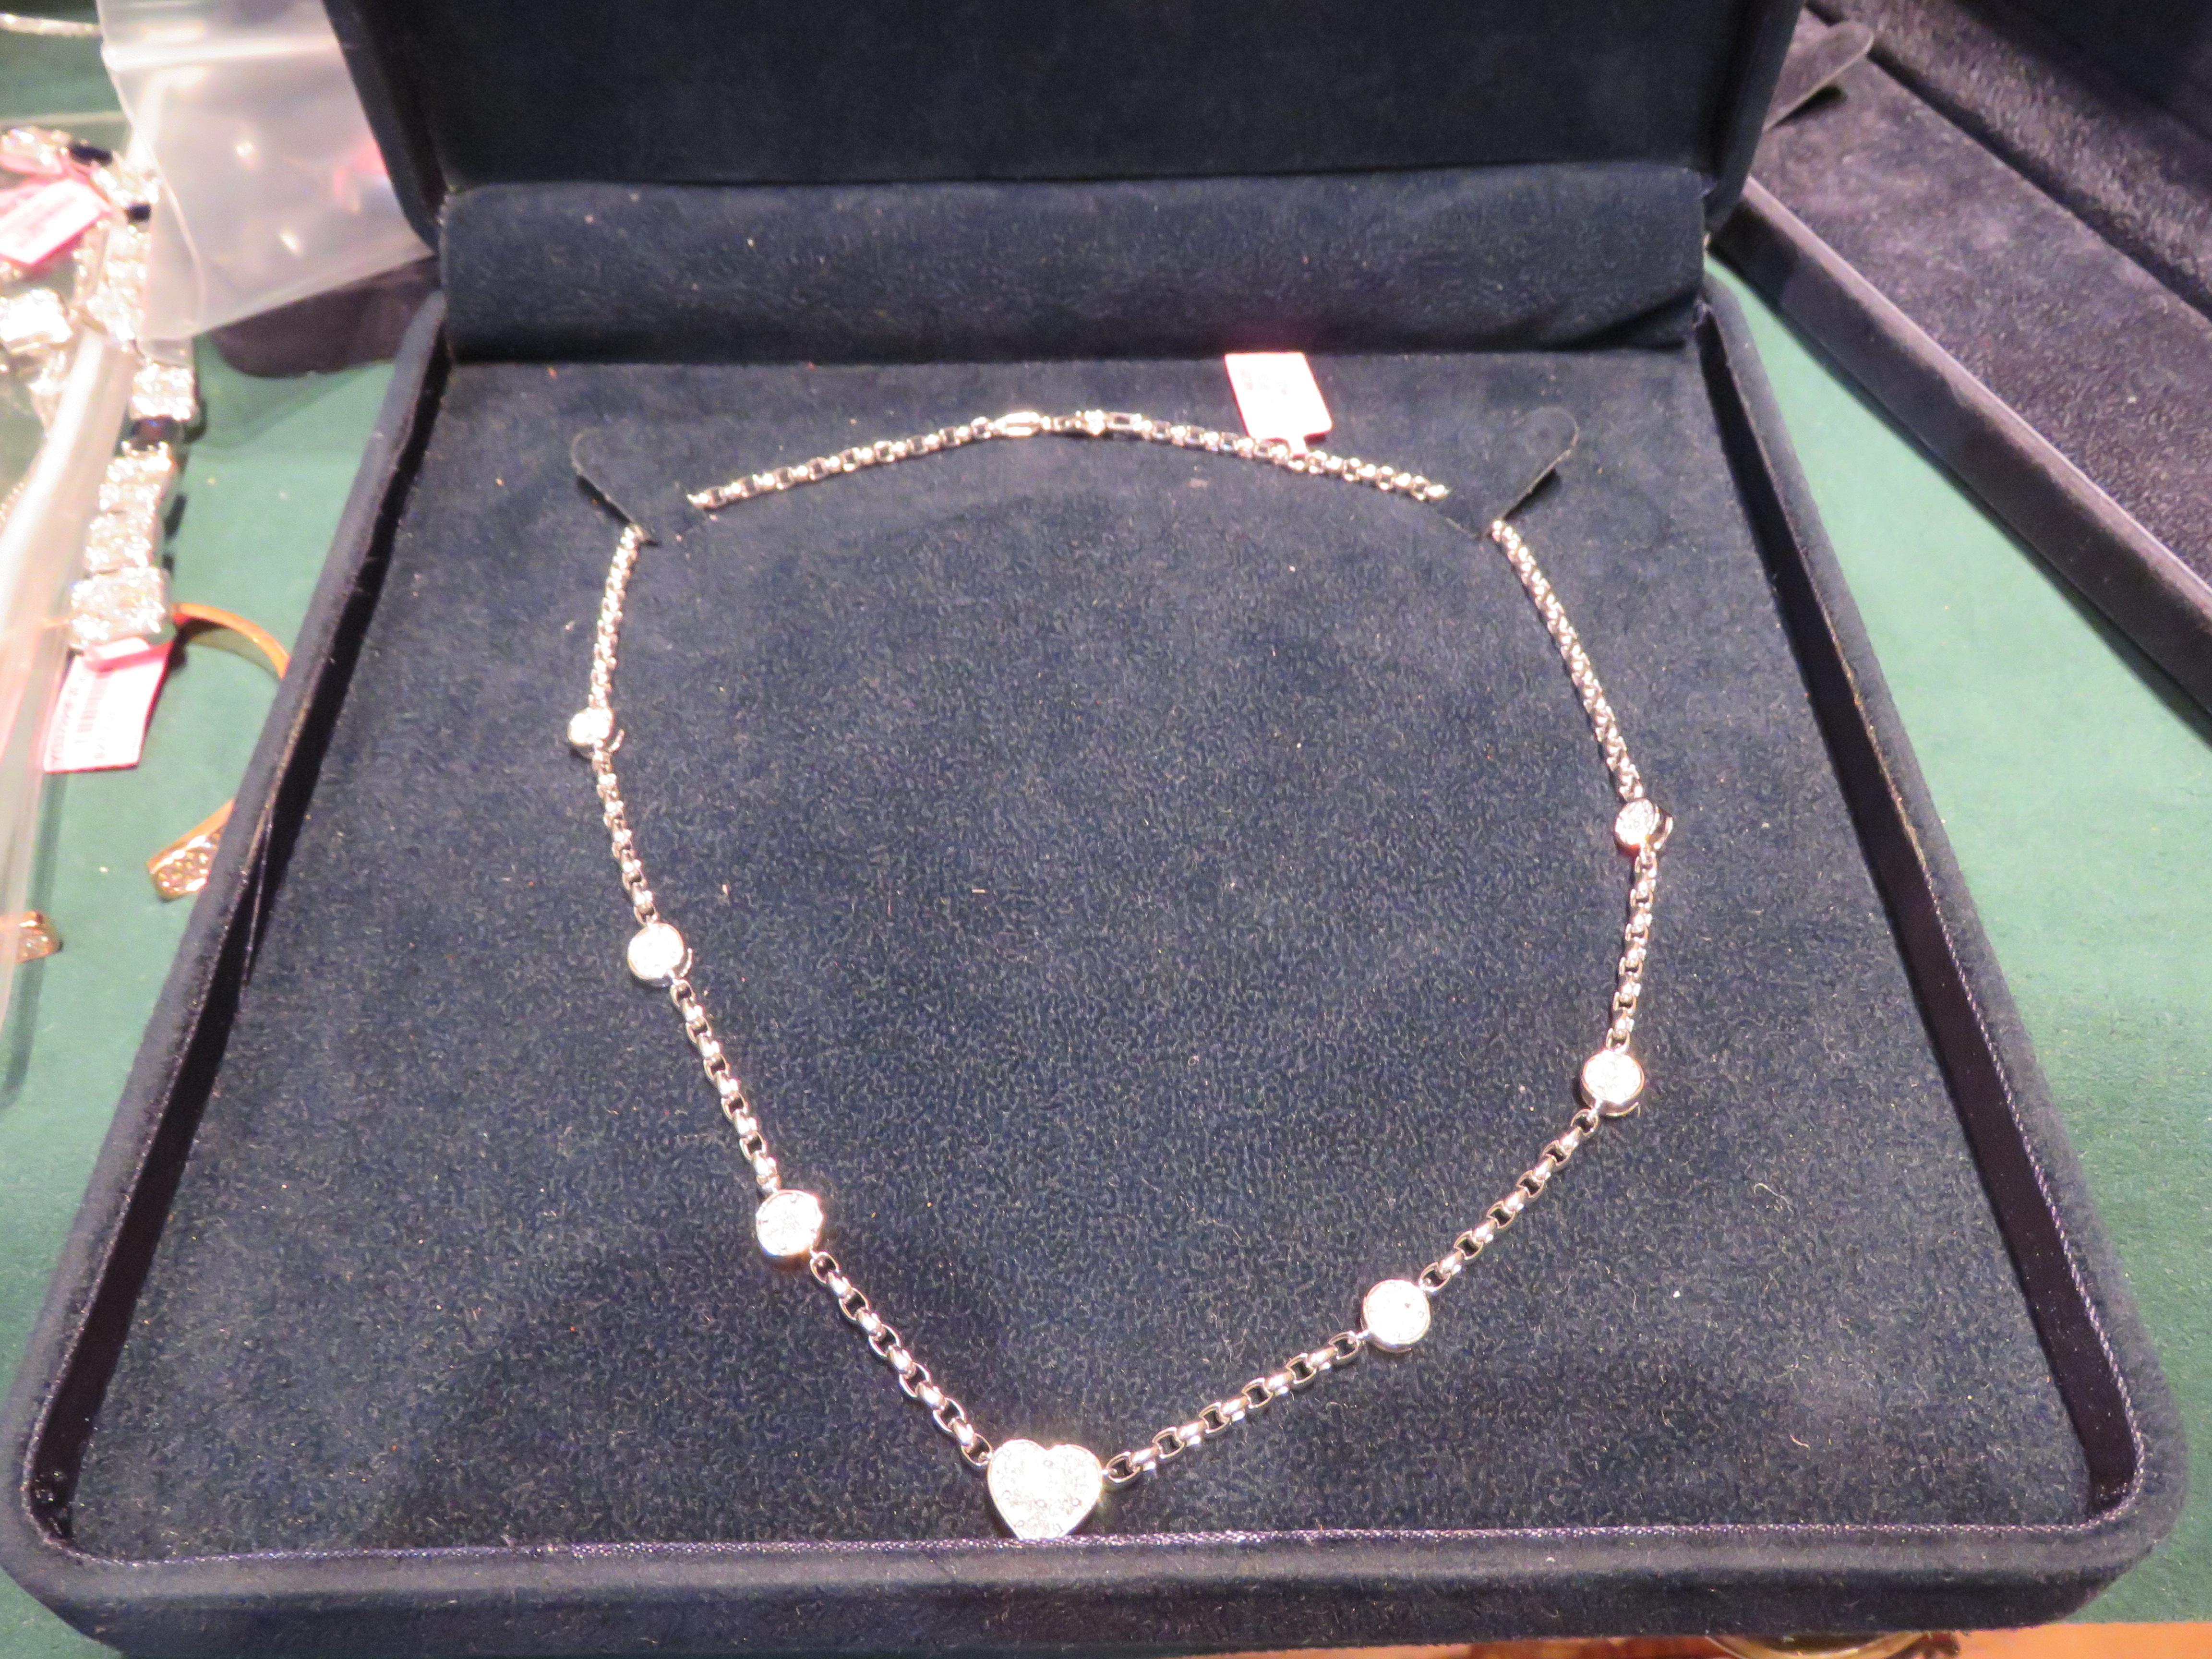 A Rare 18KT White Gold Diamond Necklace. Necklace is comprised of Finely Set Glittering Gorgeous Heart Shaped Diamond Center and adorned with Round Diamonds!!! The Diamonds are of Exquisite and Fine Quality. T.C.W. Approx 1.50CTS!!! This Gorgeous